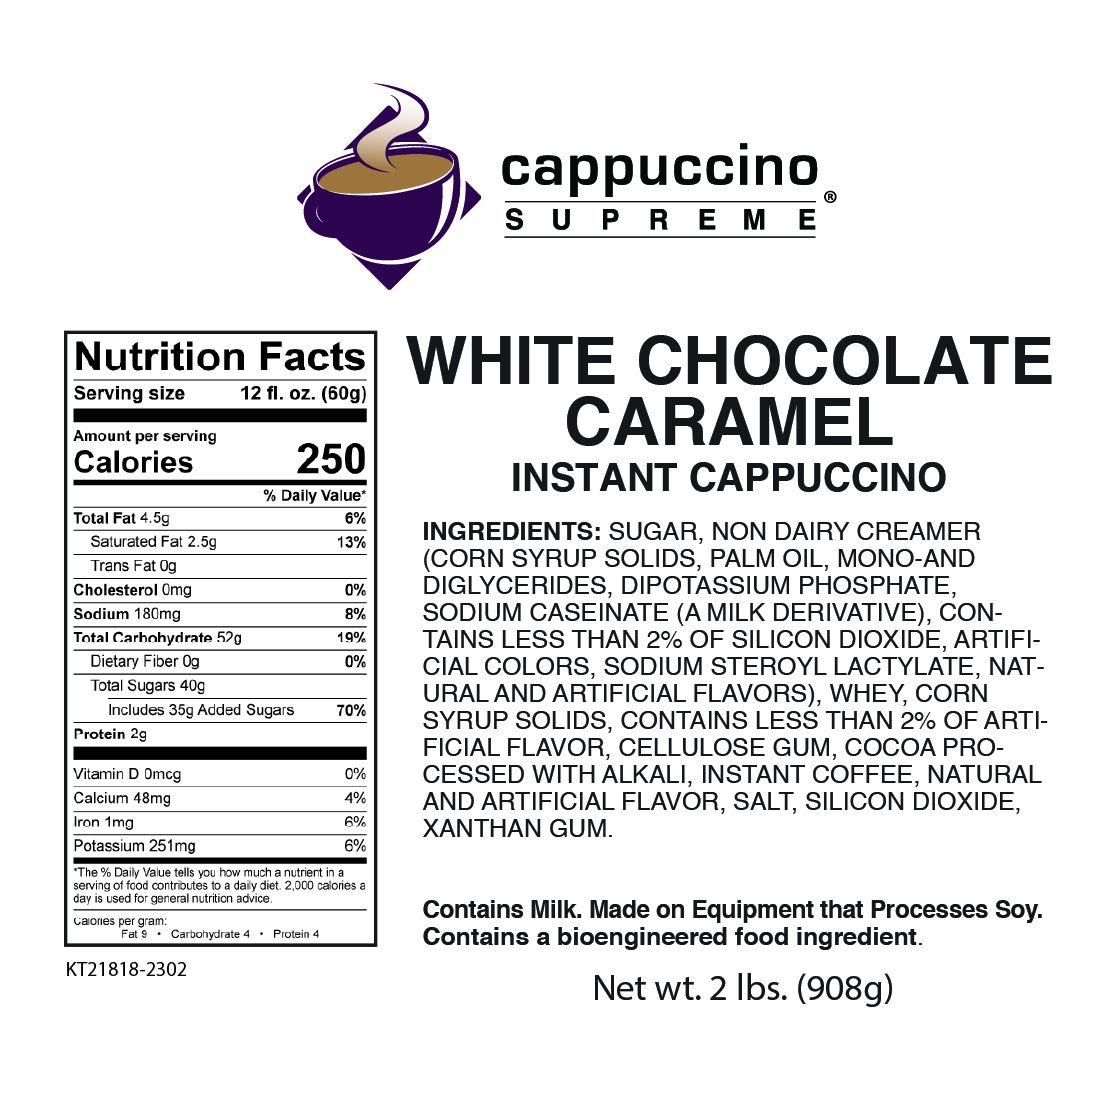 Cappuccino Supreme white chocolate caramel instant cappuccino mix nutrition and ingredients